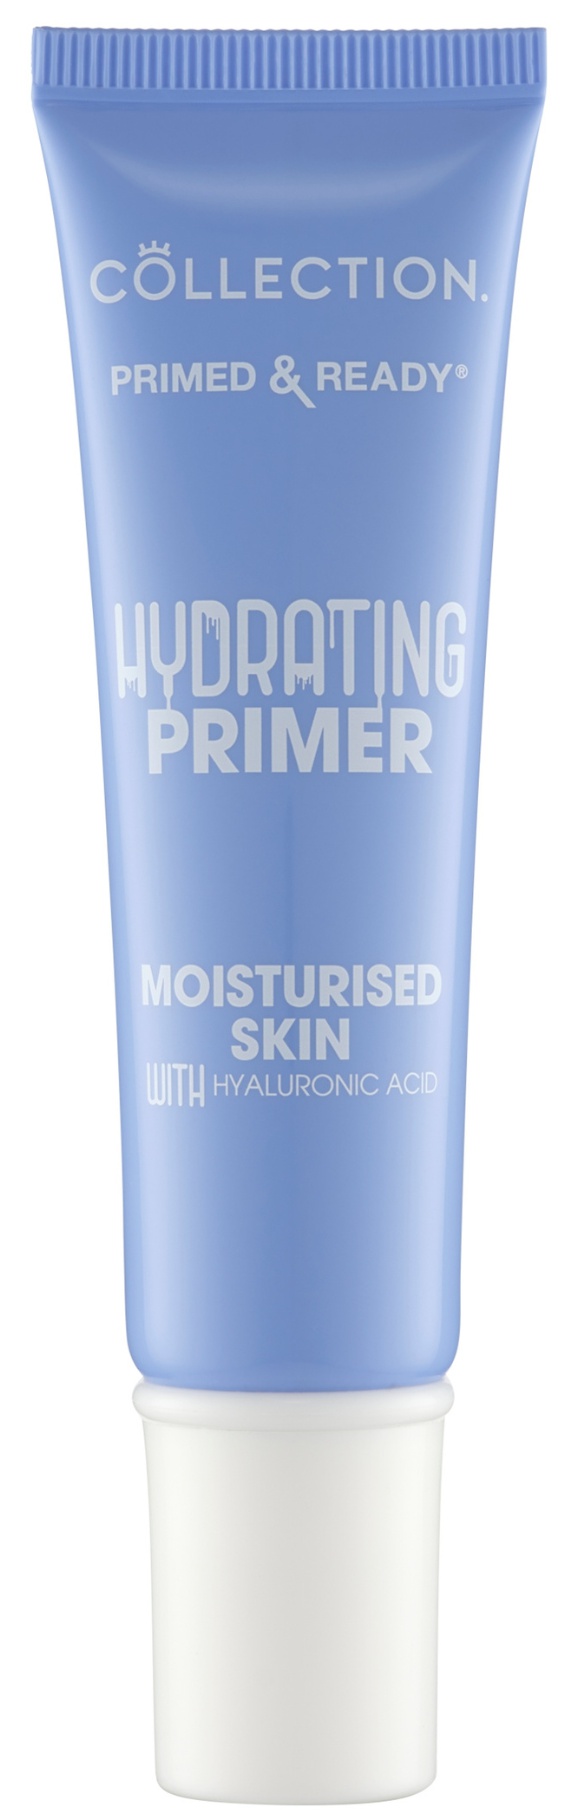 Collection Hydrating Primer